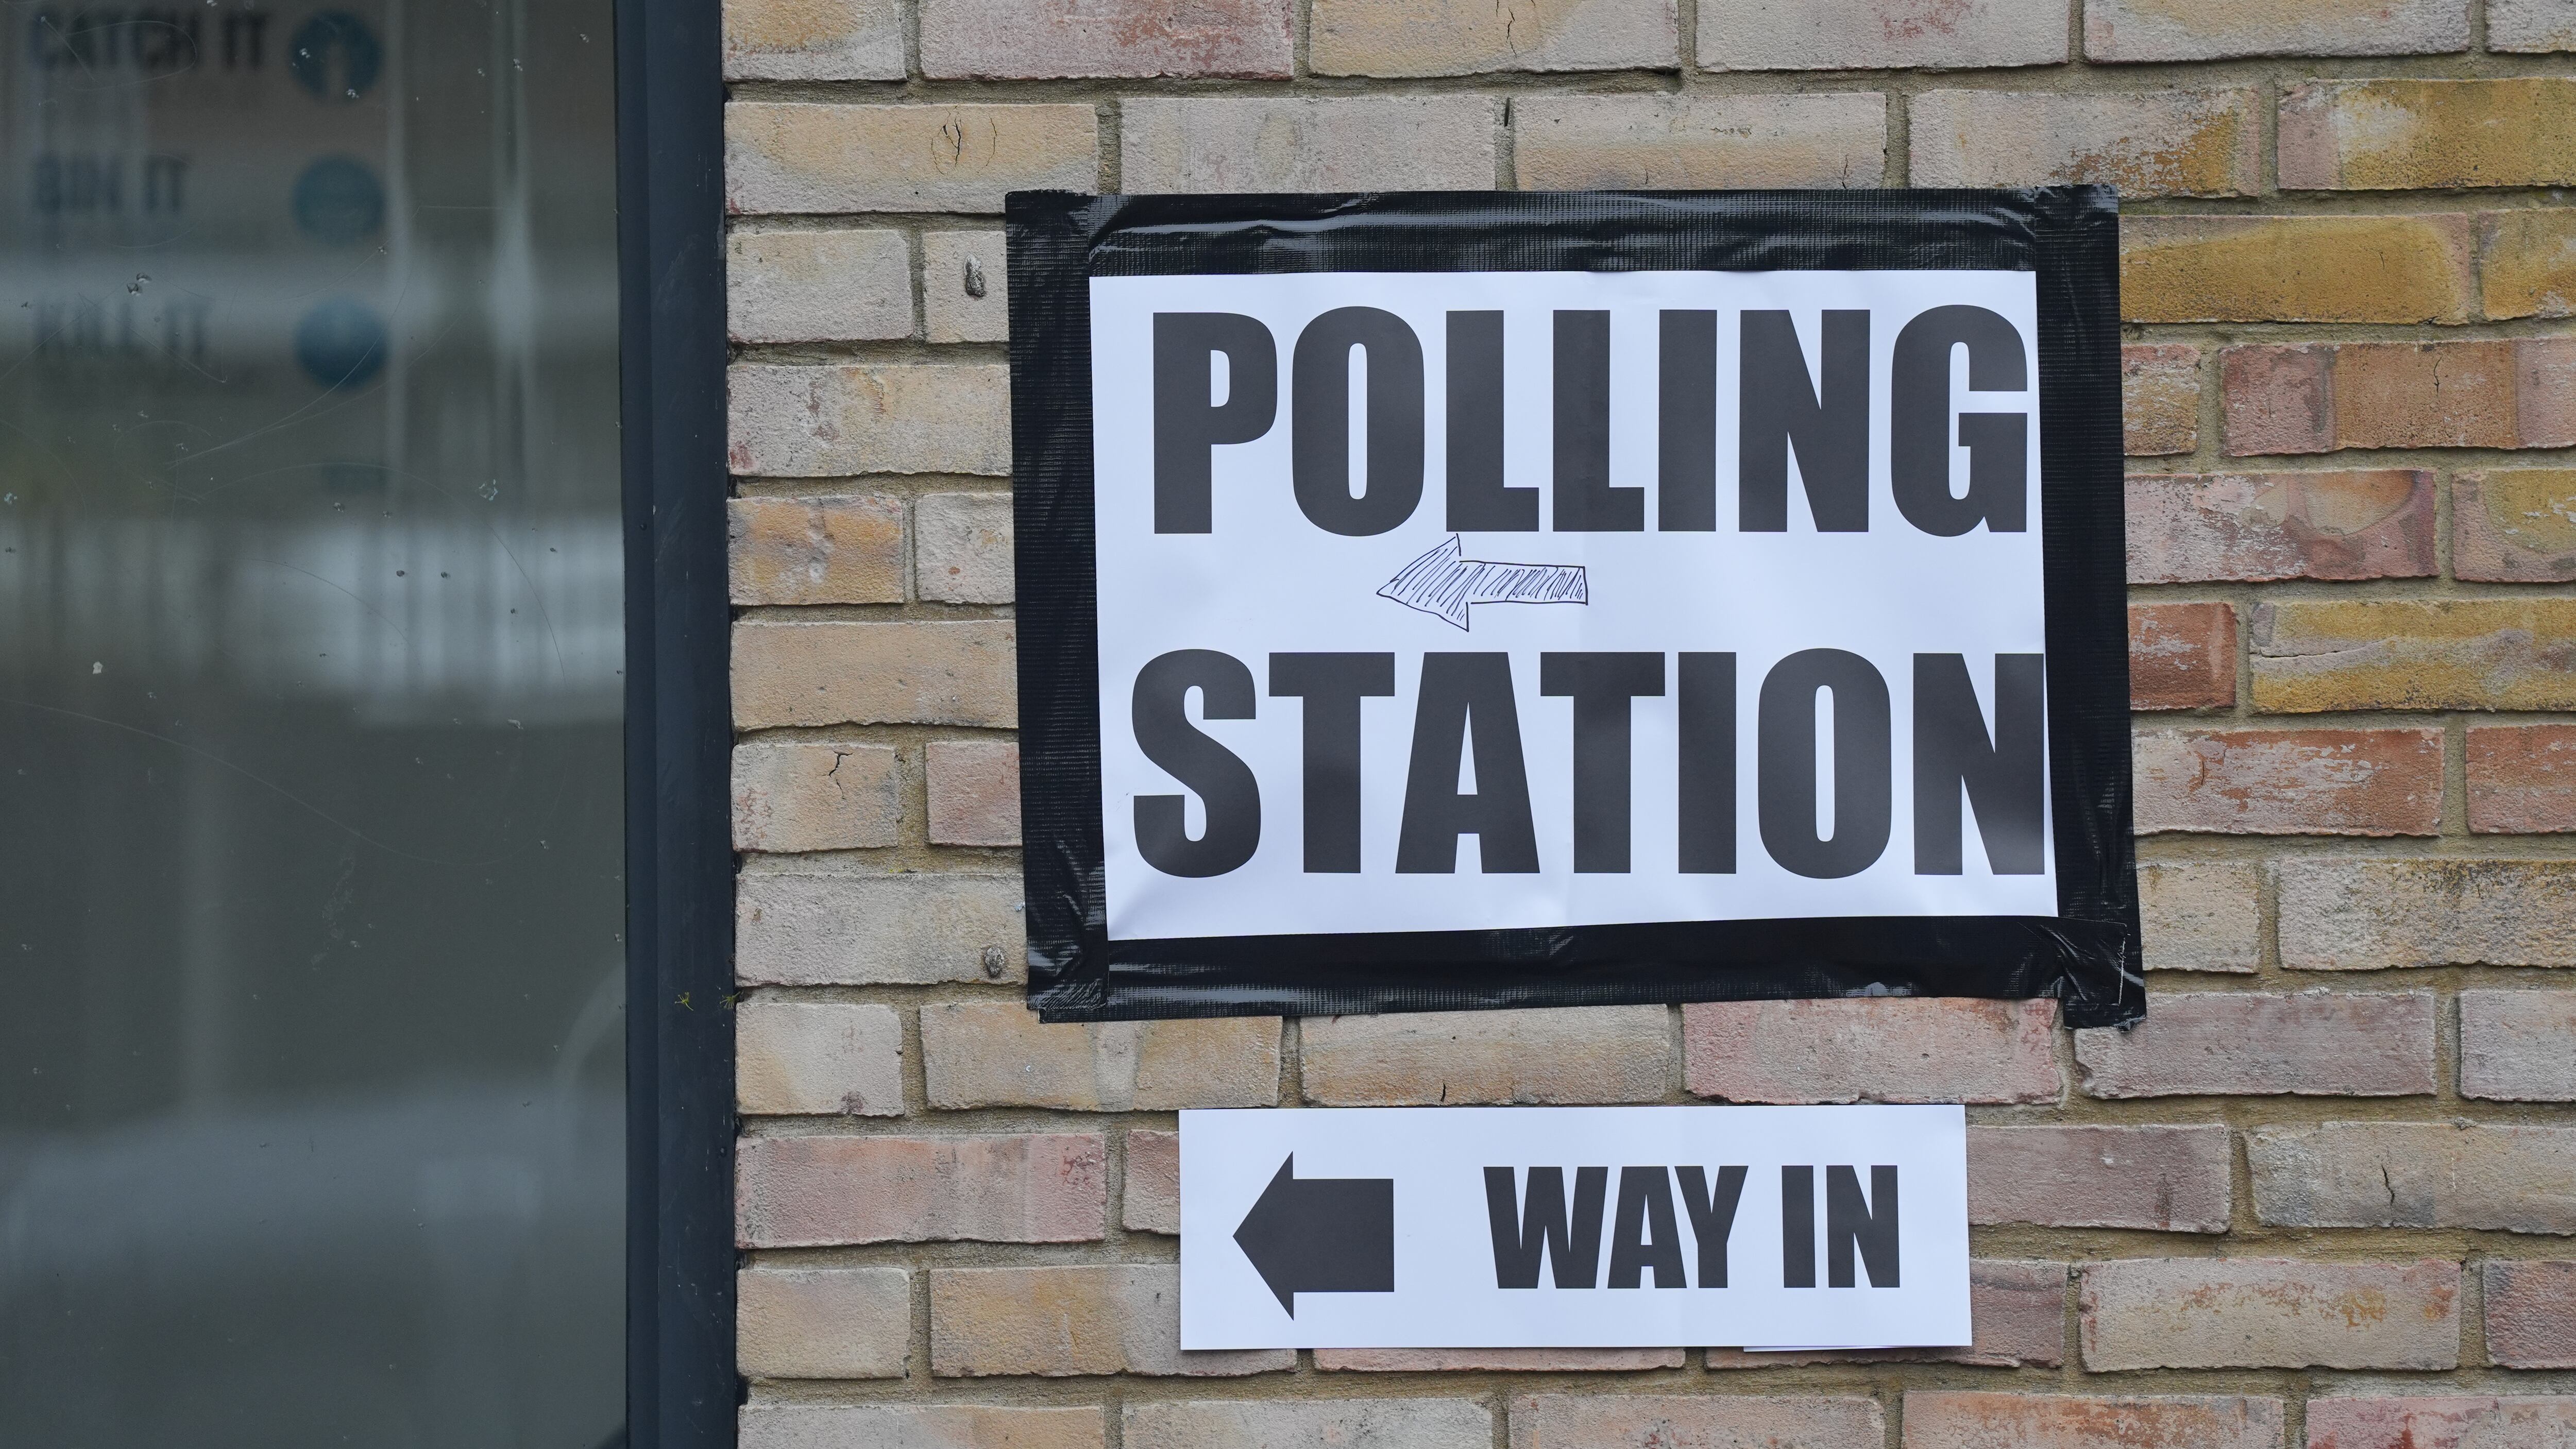 The UK goes to the polls on Thursday to decide the next government